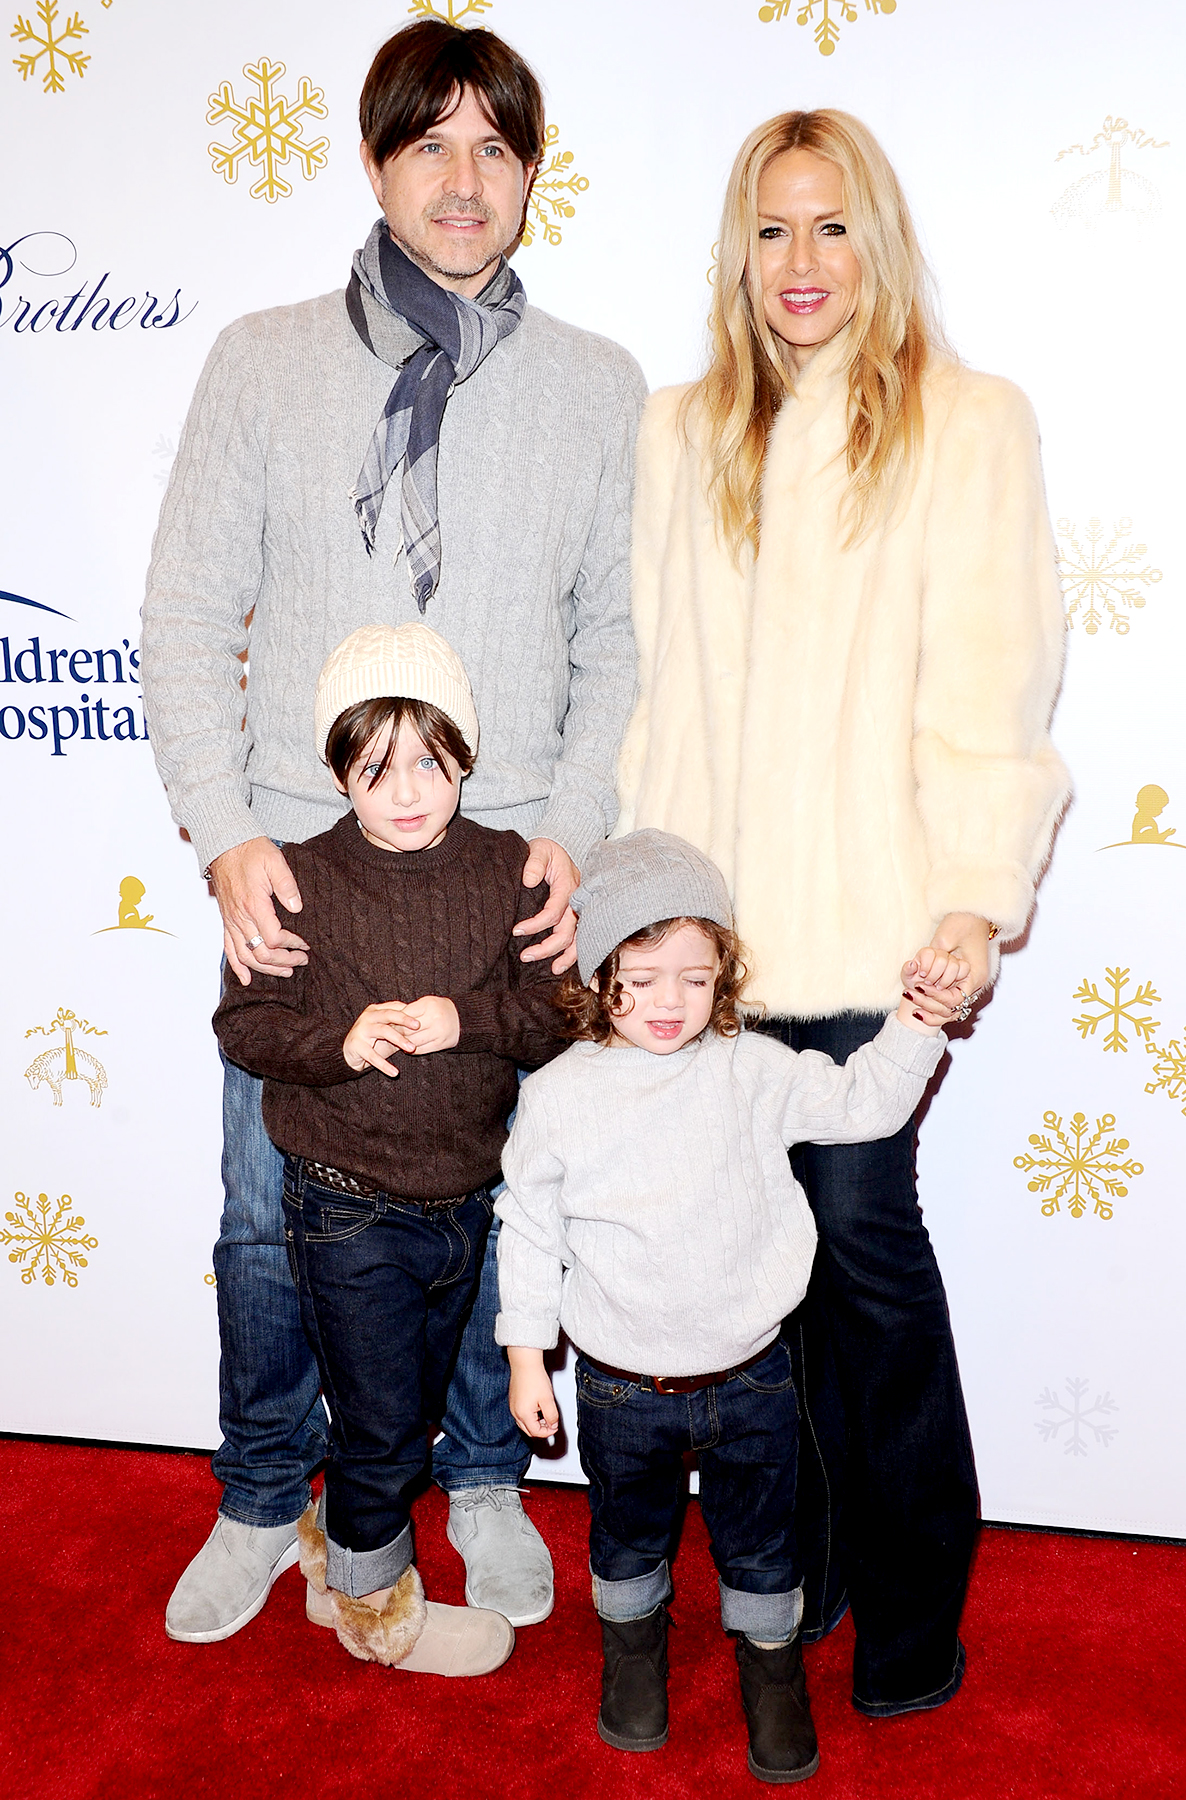 Rachel Zoe on Son Being Her Mini Me: 'I Gave Birth to Myself in a Boy